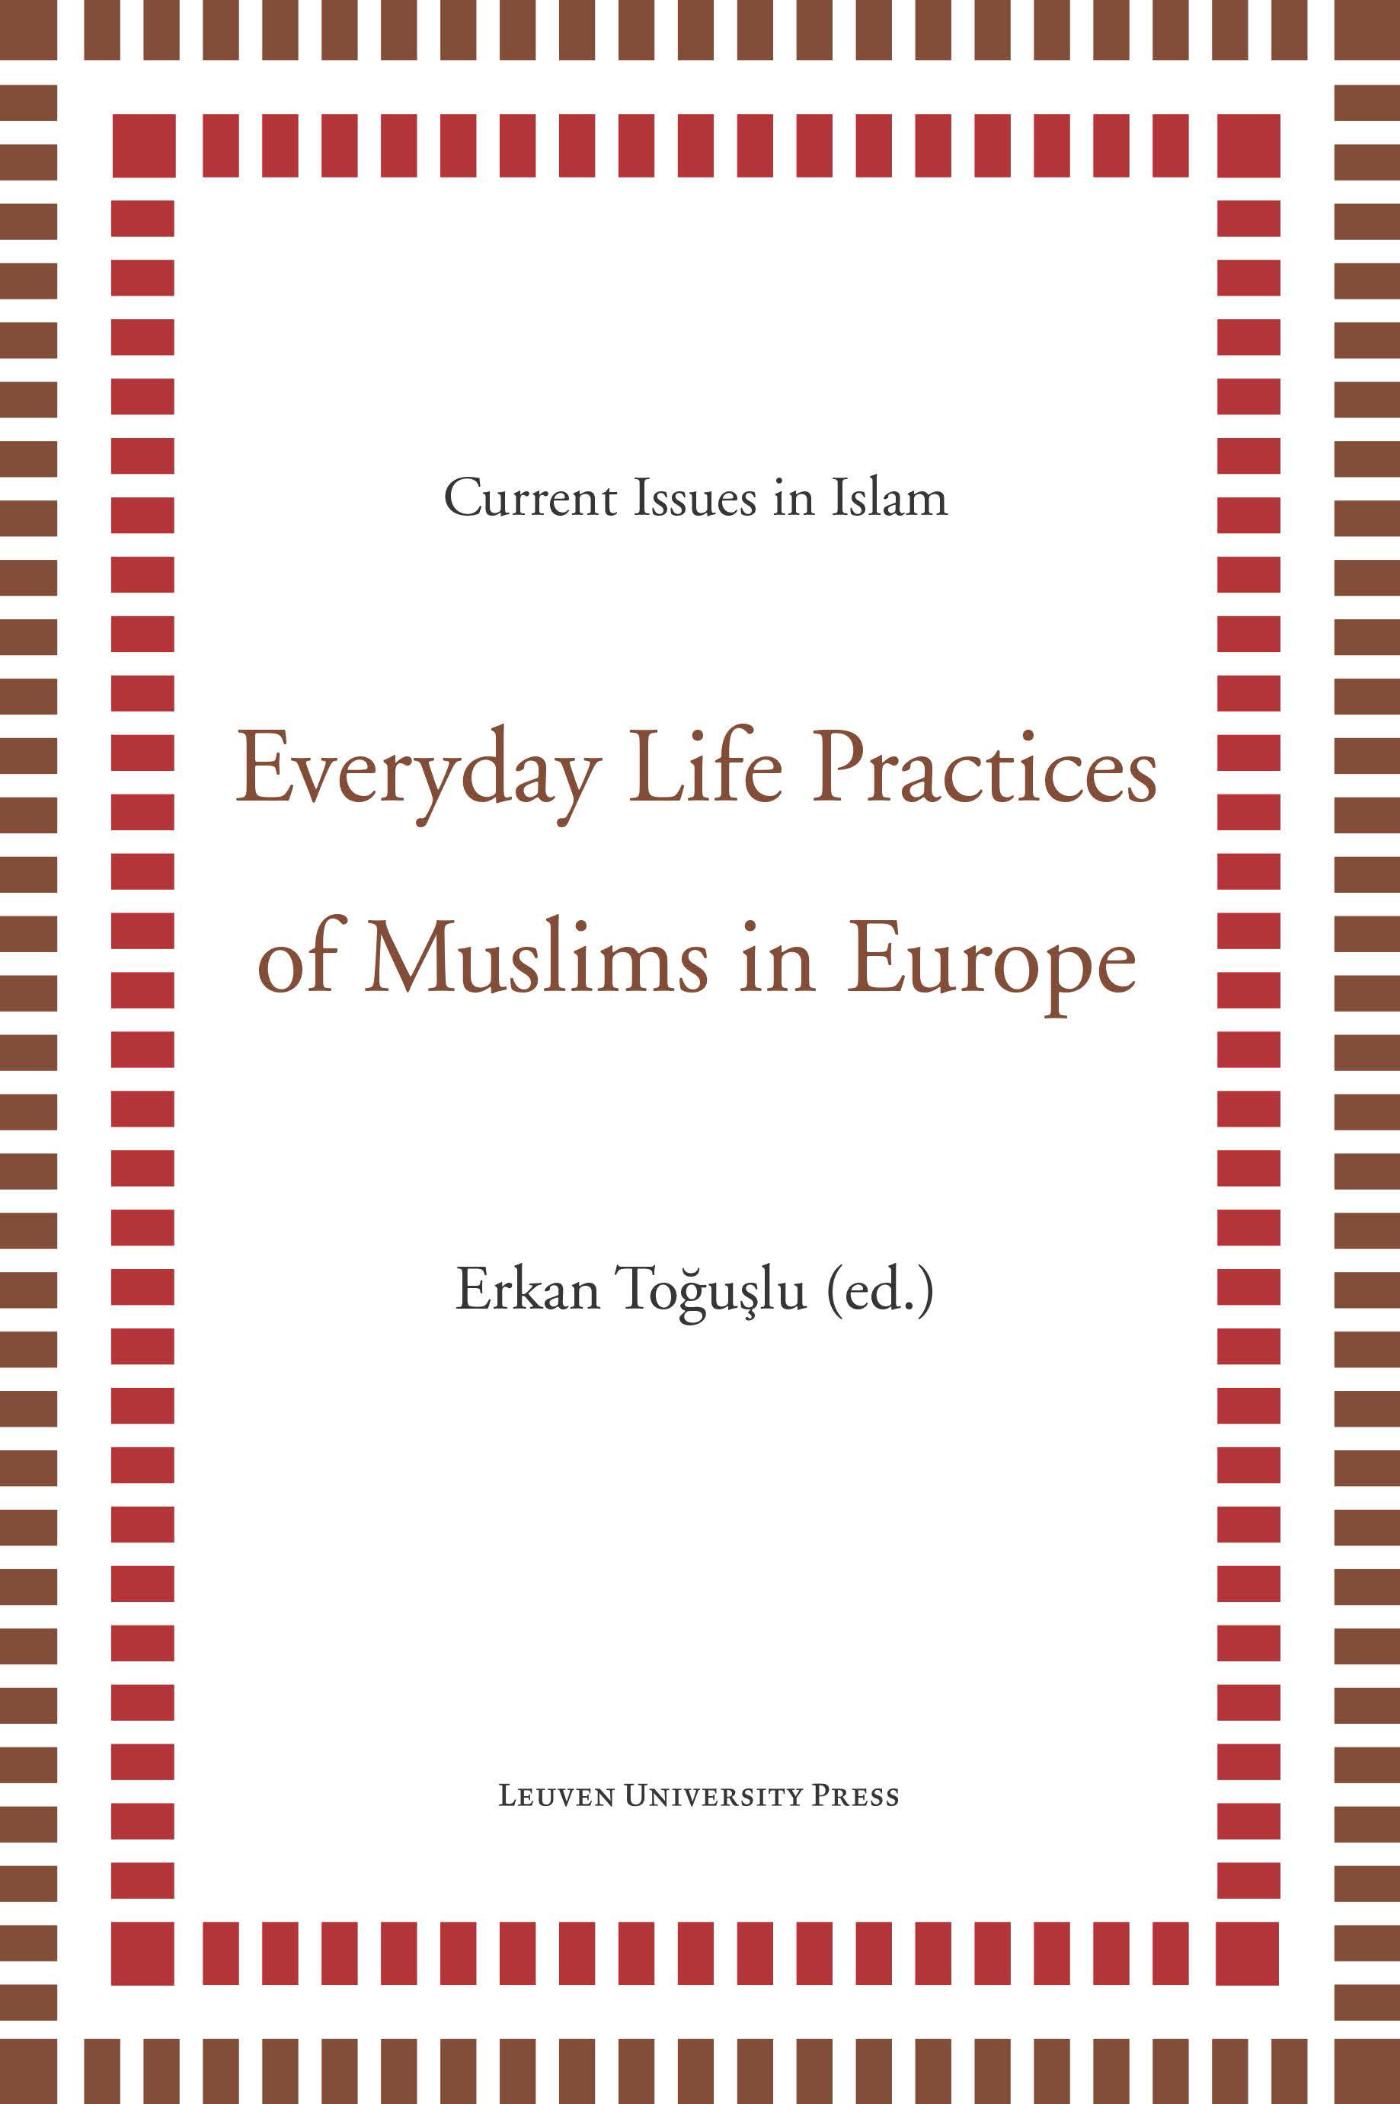 Everyday life practices of Muslims in Europe